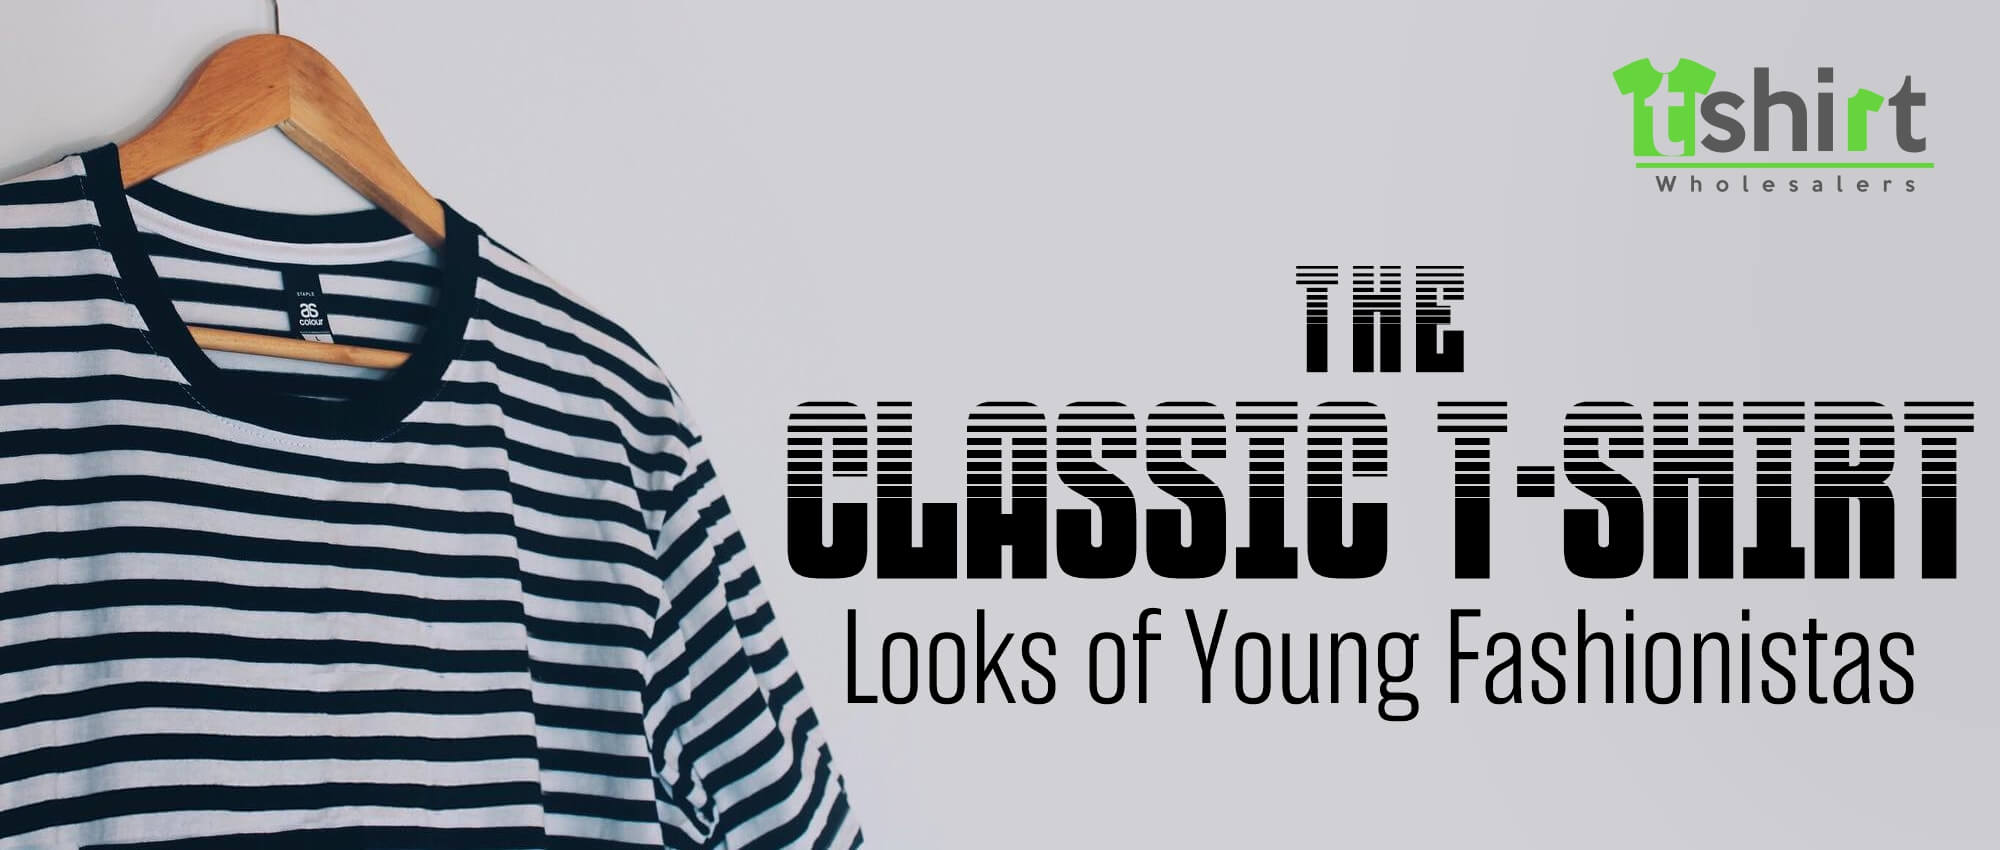 THE CLASSIC T-SHIRT LOOKS OF YOUNG FASHIONISTAS